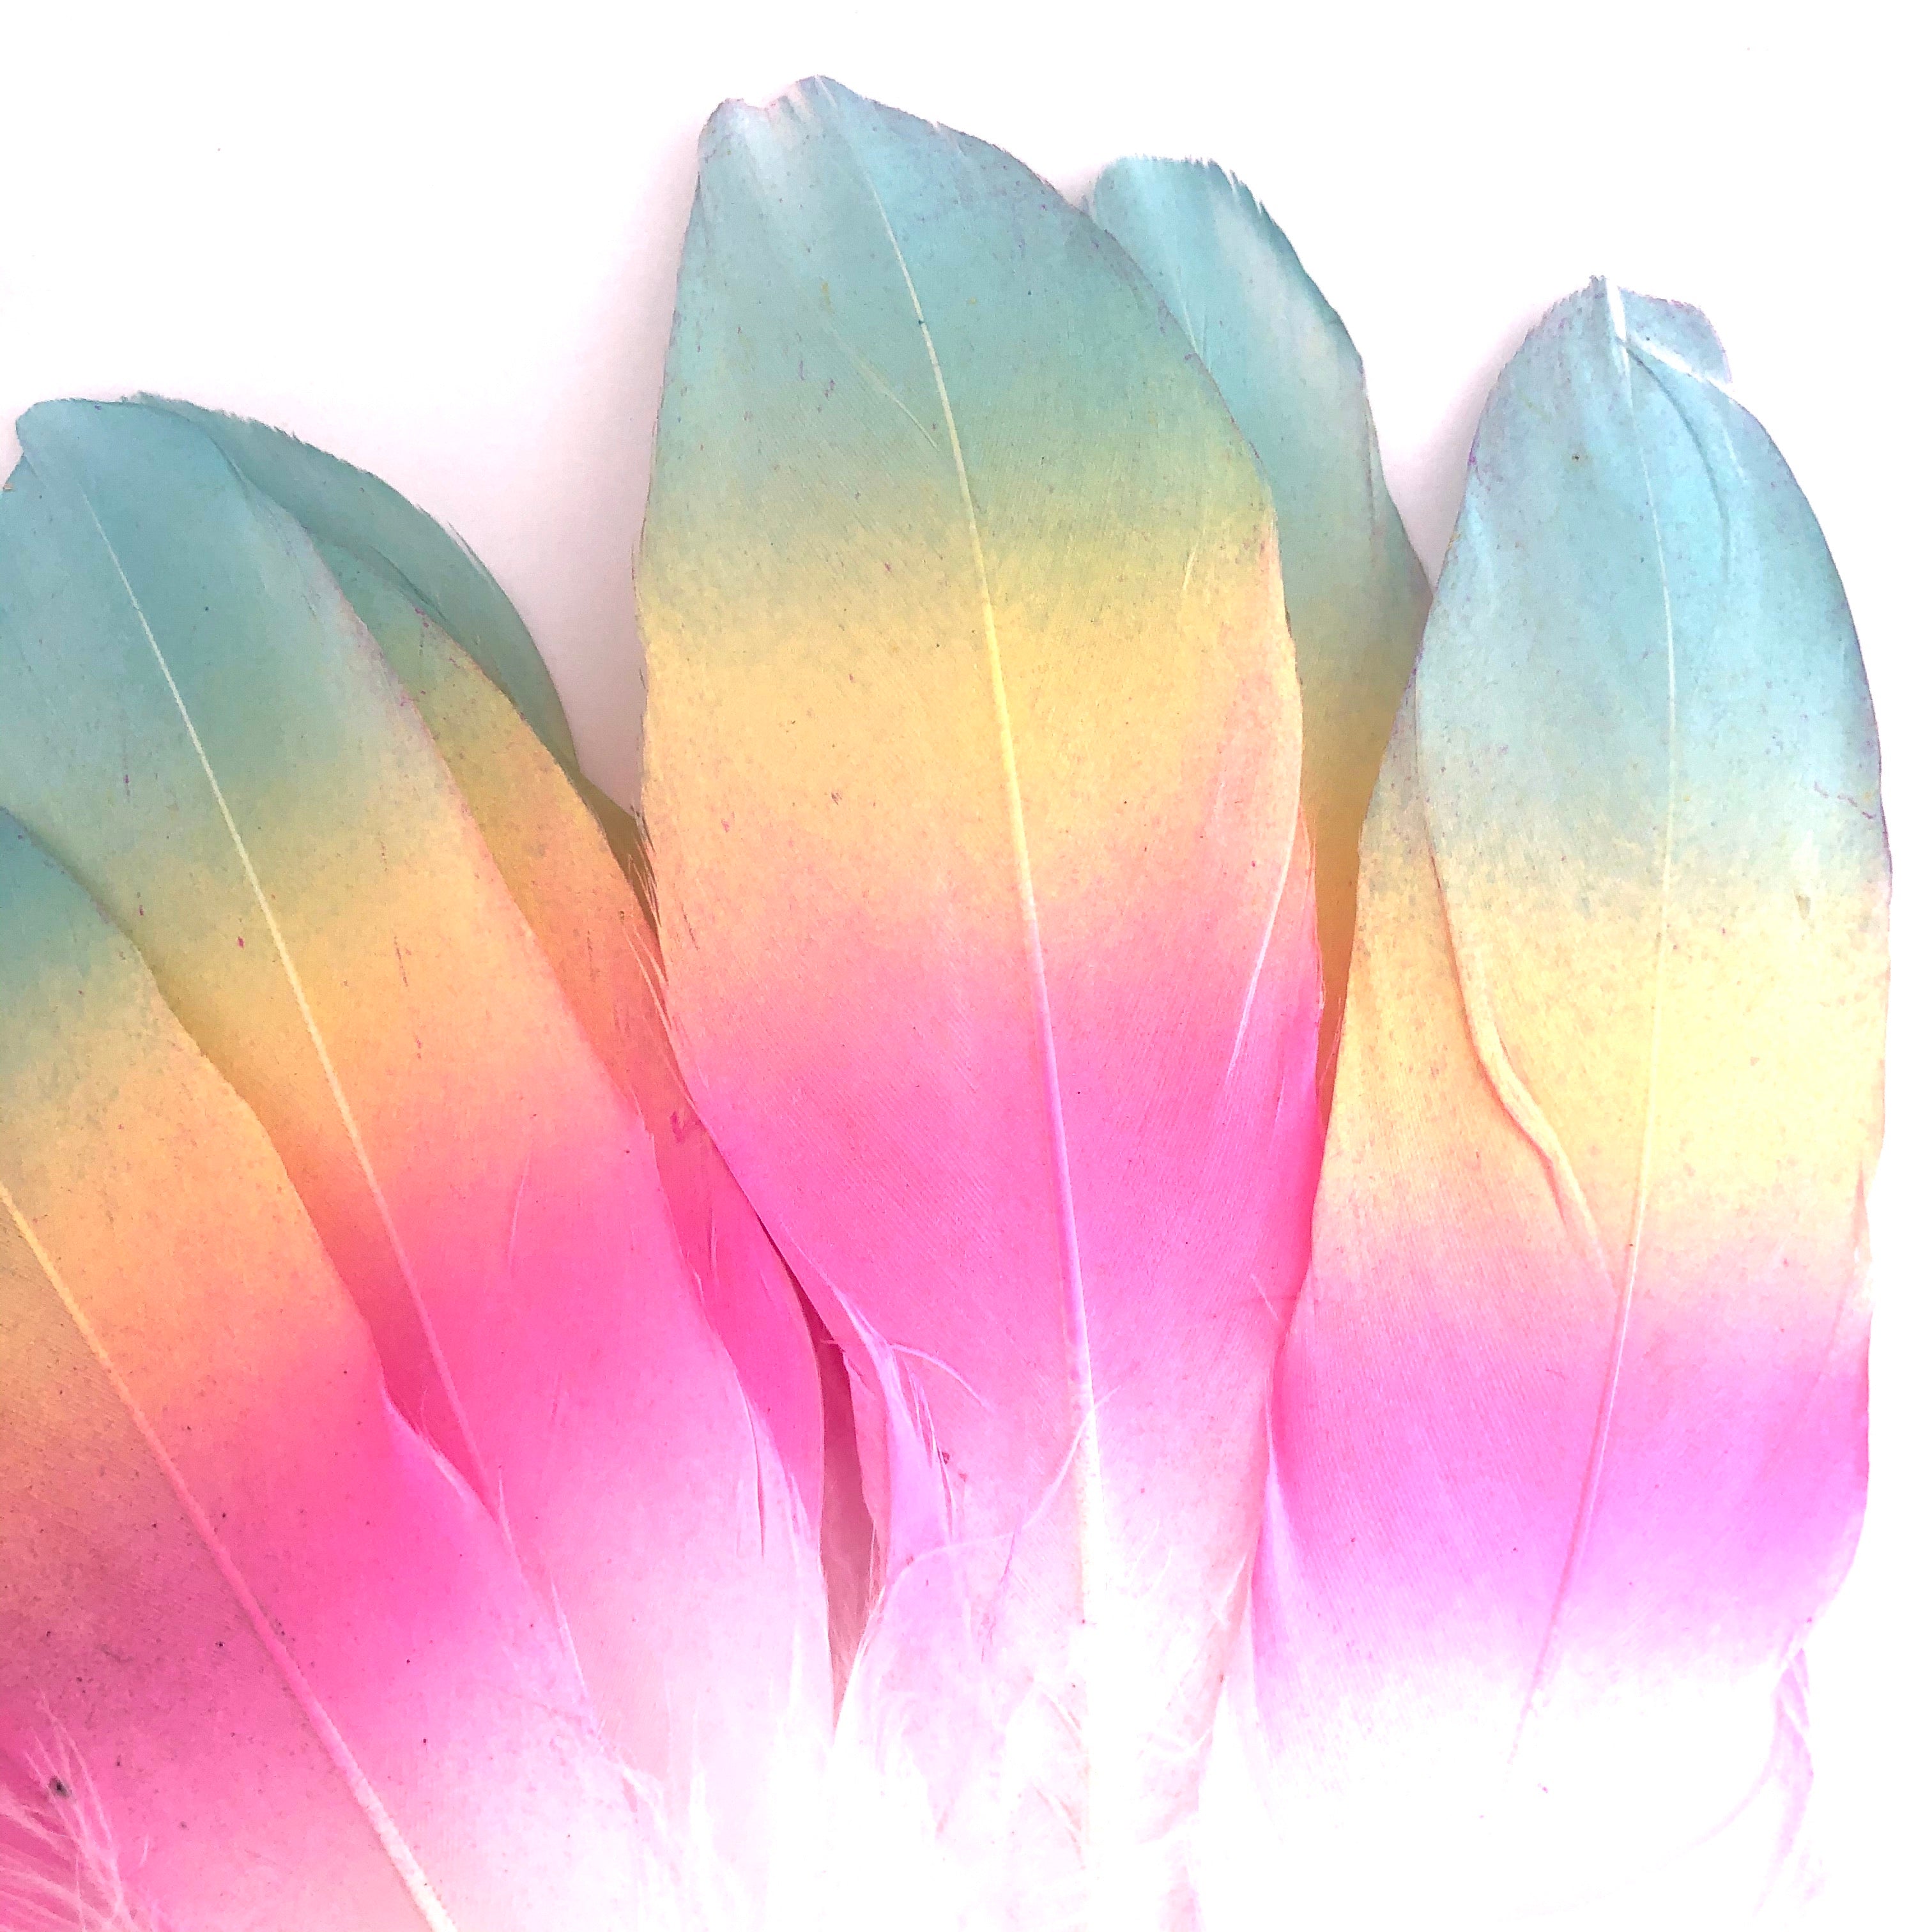 Goose Pointer Printed White Feather Art Craft - Ombre Rainbow Style 13 x 10 pcs